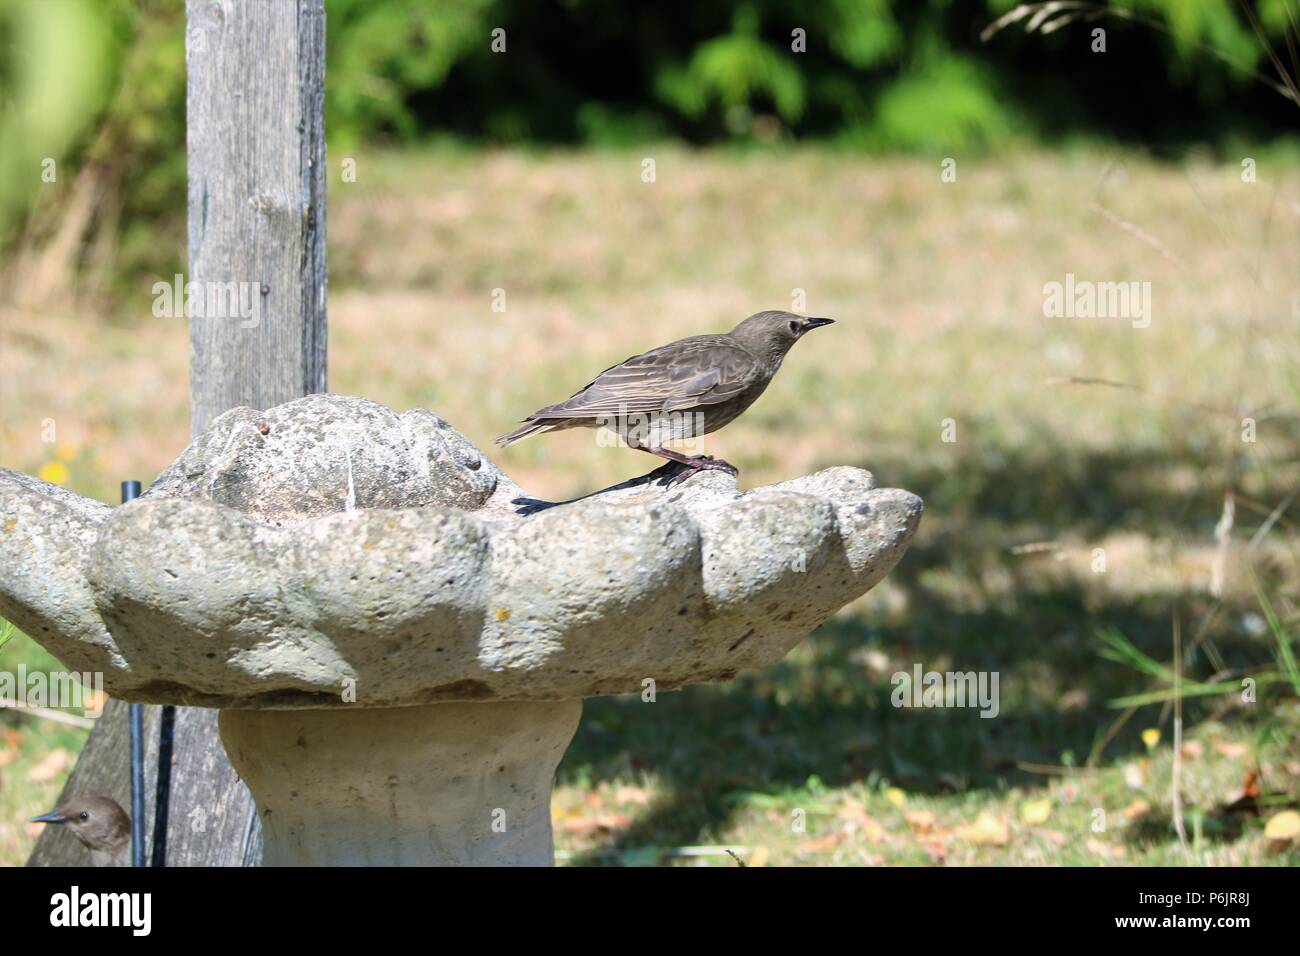 Starling fledgling on a stone bird bath on a sunny day Stock Photo